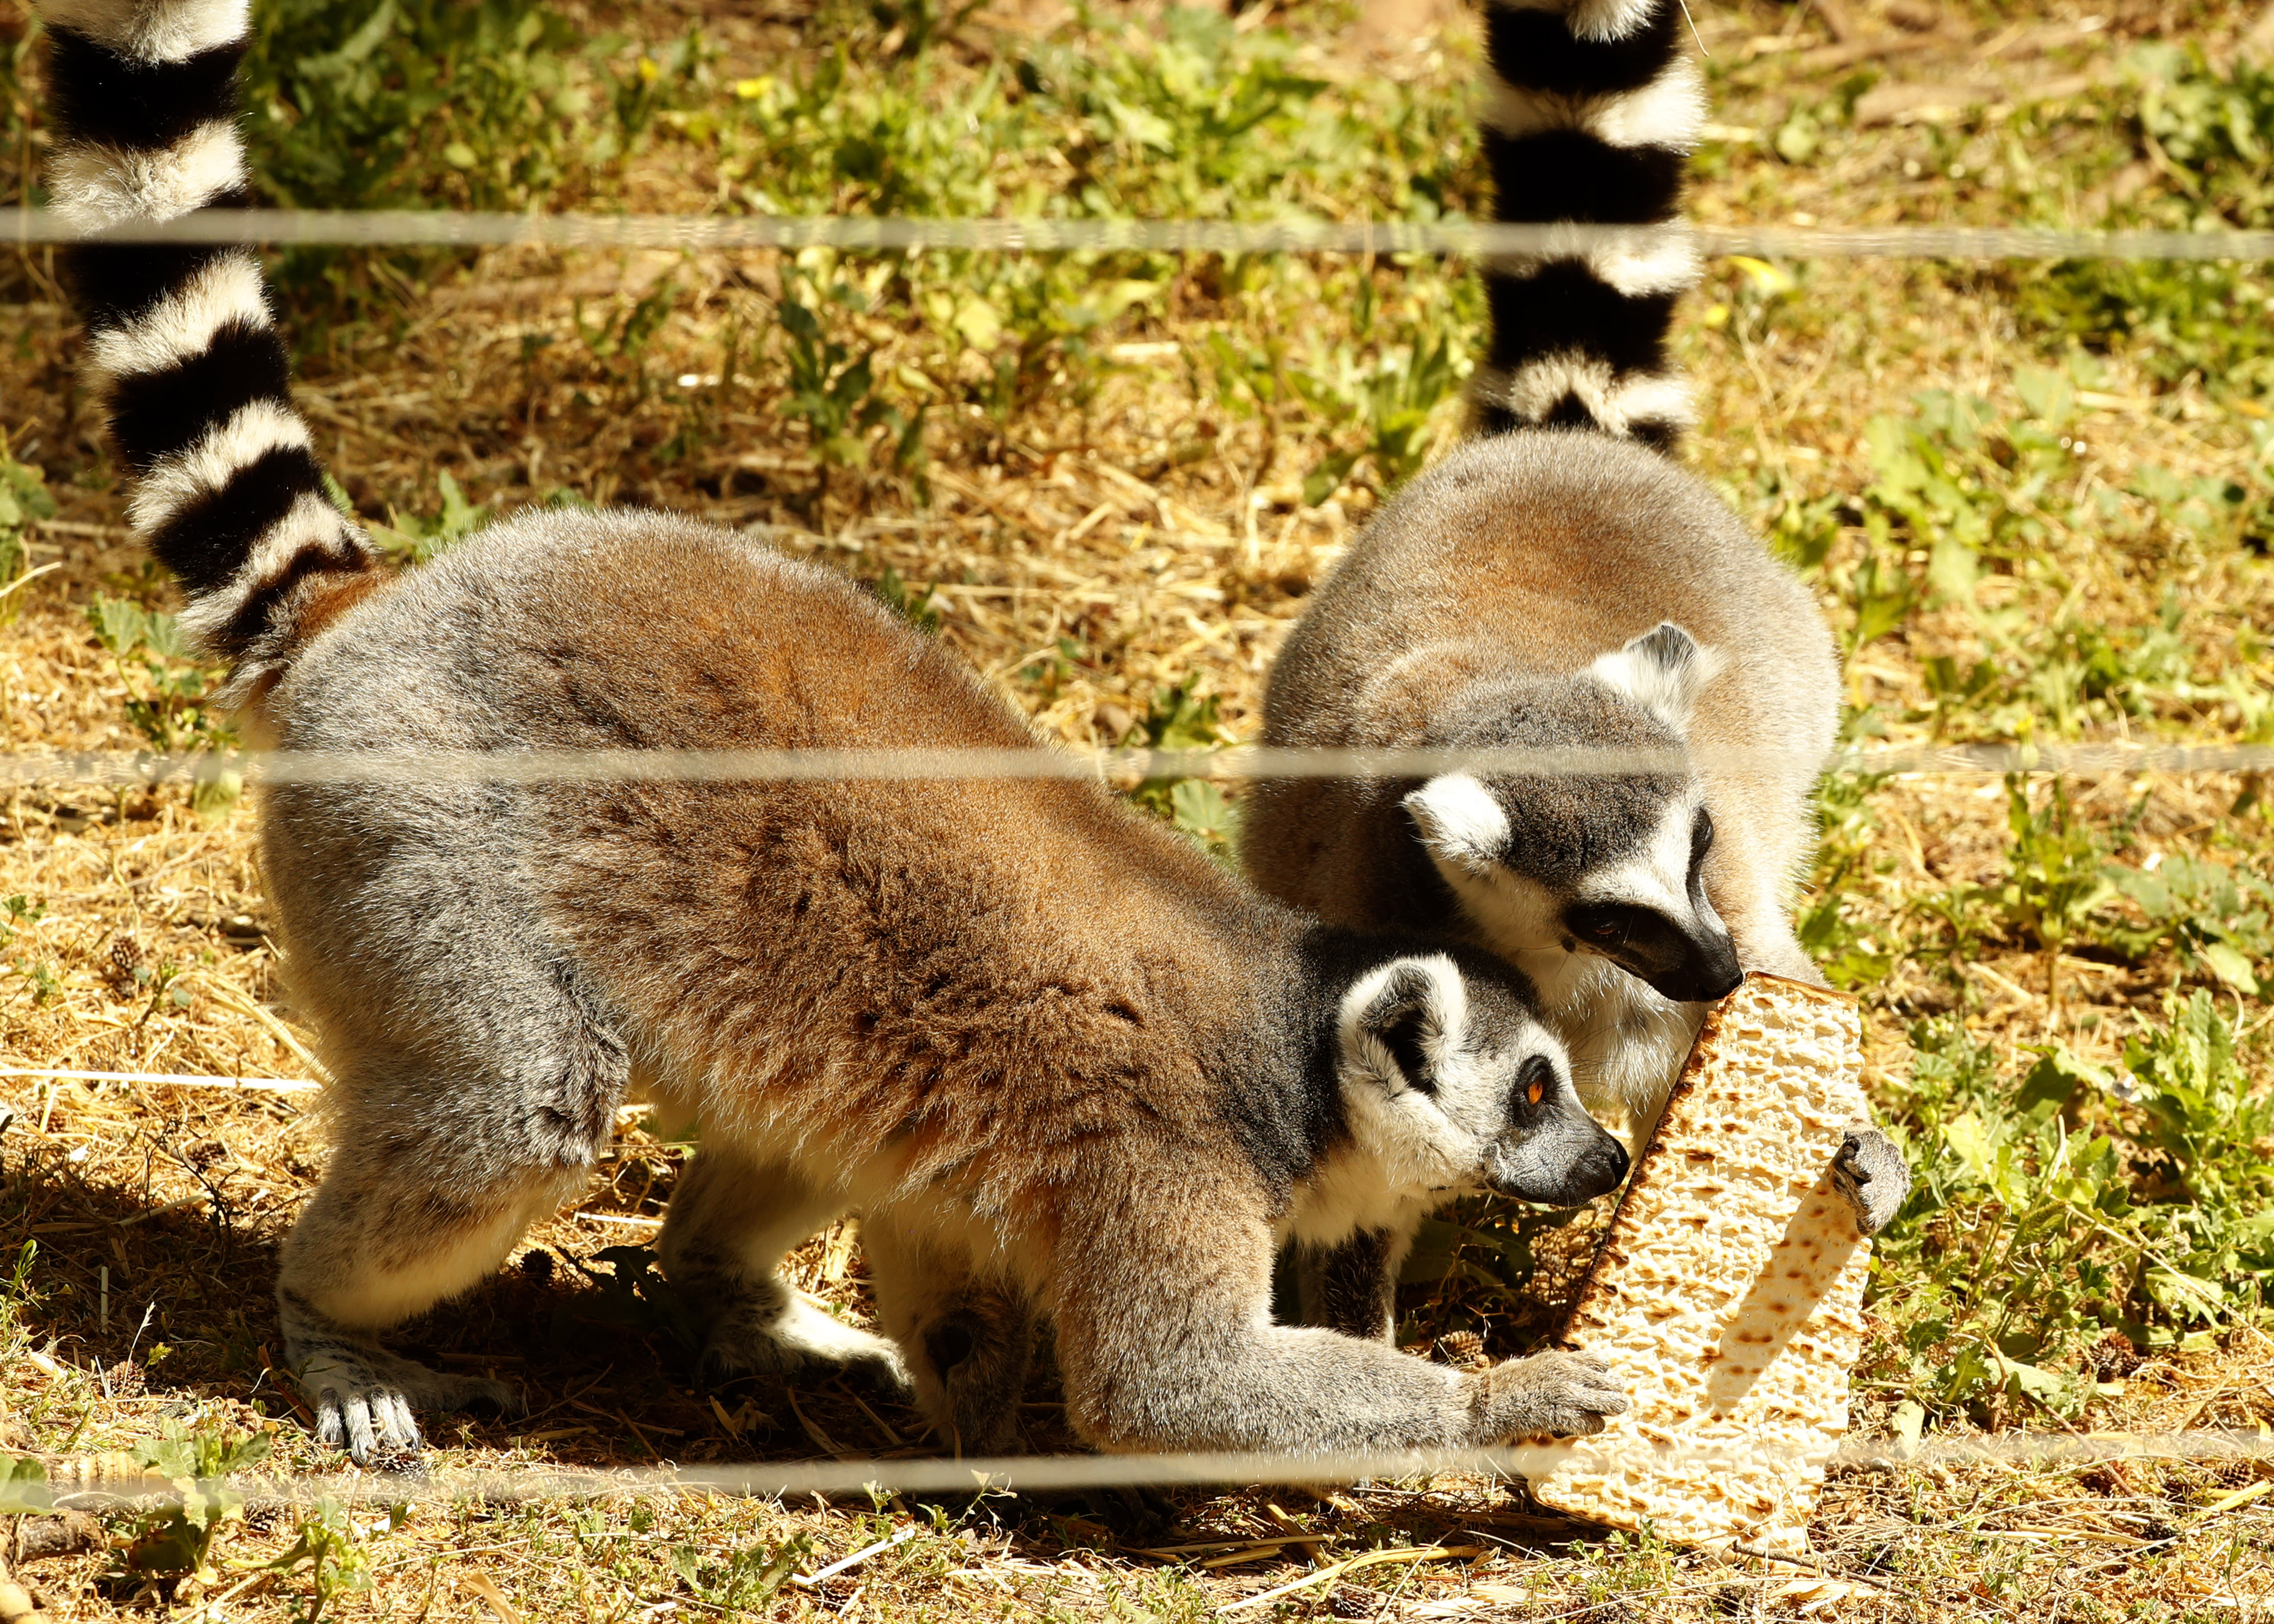 Lemurs eat the traditional Matza (unleavened bread) in preparation for the upcoming Jewish holiday of Passover, at the Ramat Gan Safari Park near Tel Aviv (Jack Guez/AFP)